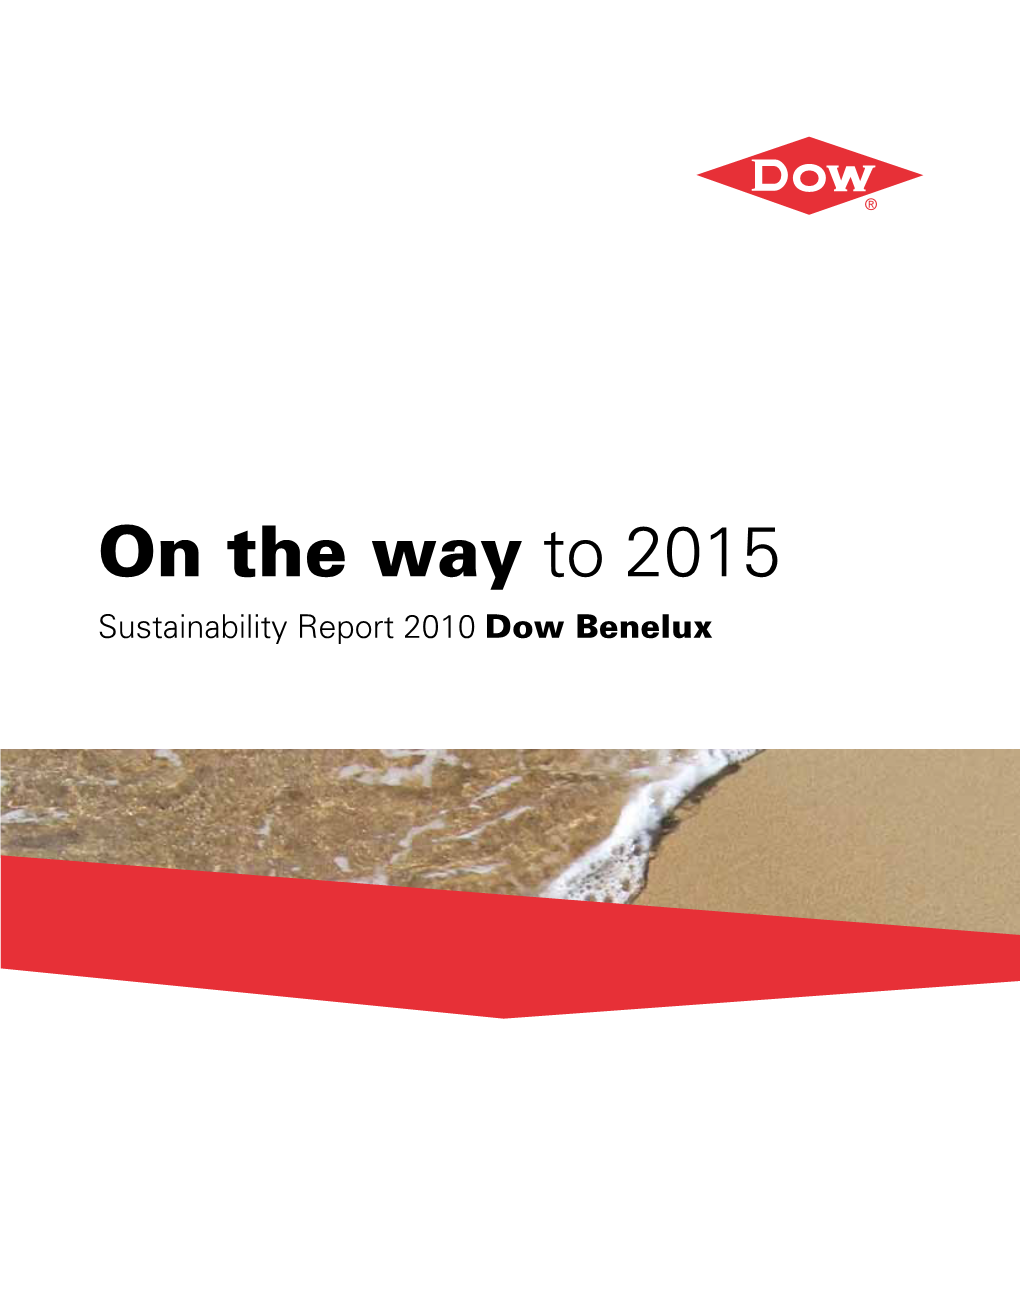 On the Way to 2015 Sustainability Report 2010 Dow Benelux Content Dow in the Benelux